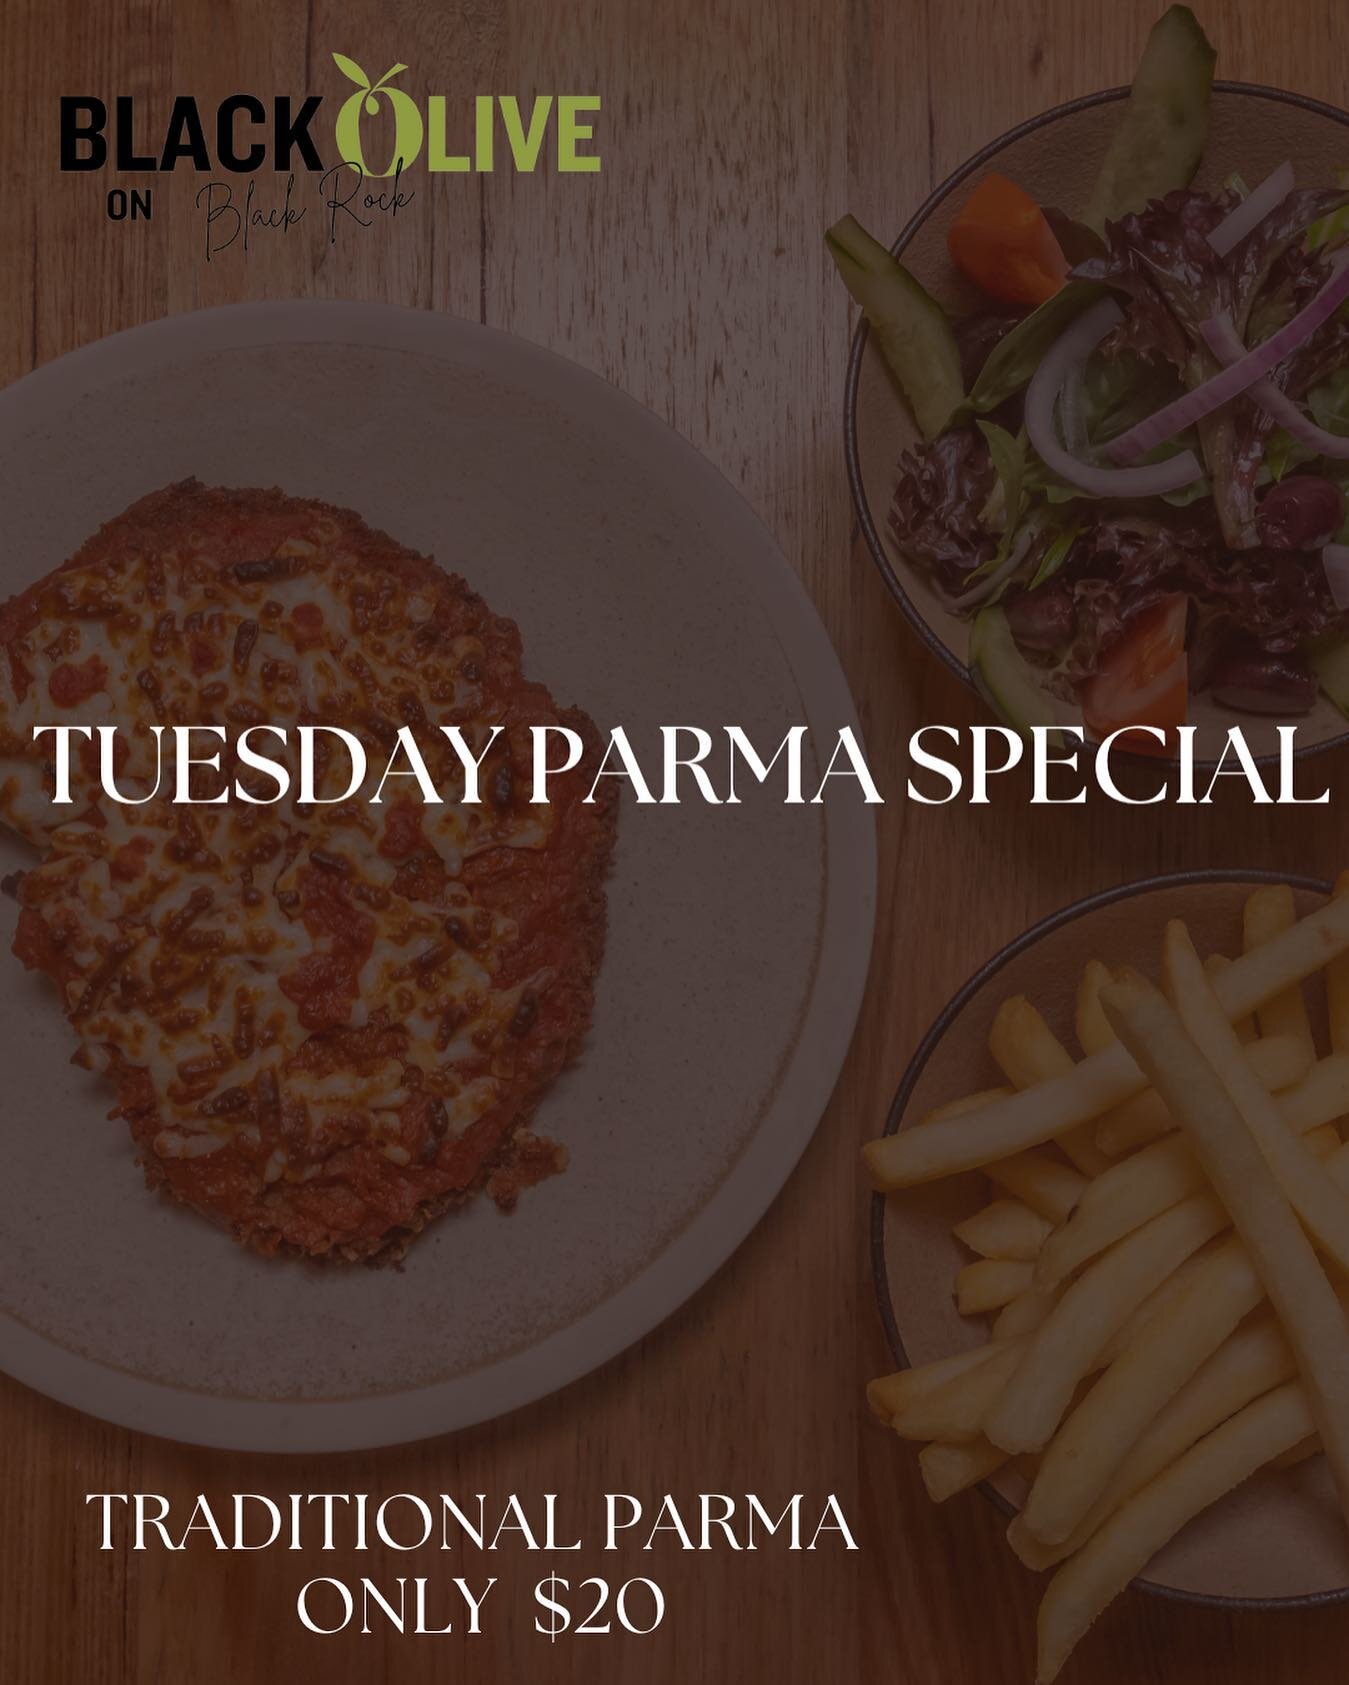 Tuesday Parma night&rsquo;s are back🤌🏽
Come on in and enjoy a delicious chicken parmigiana every TUESDAY 🍽️
.
.
.
Choose from our mouthwatering options:
 $20 for Traditional or Italian Parma
 $29 for Traditional or Italian Parma with a 300ml beer 